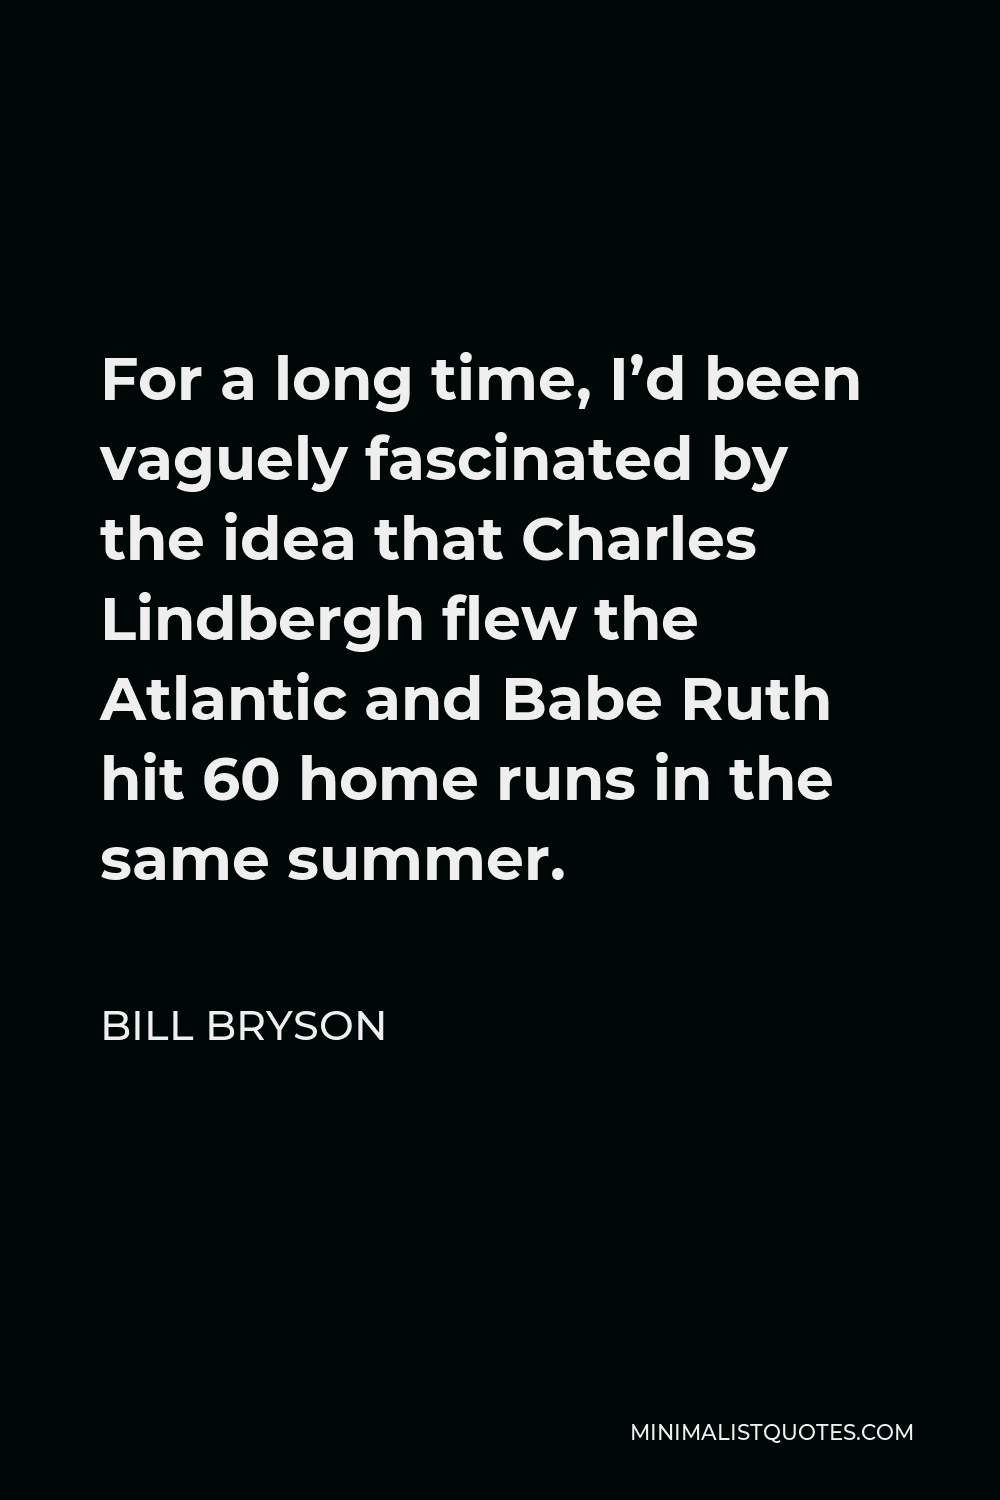 Bill Bryson Quote - For a long time, I’d been vaguely fascinated by the idea that Charles Lindbergh flew the Atlantic and Babe Ruth hit 60 home runs in the same summer.